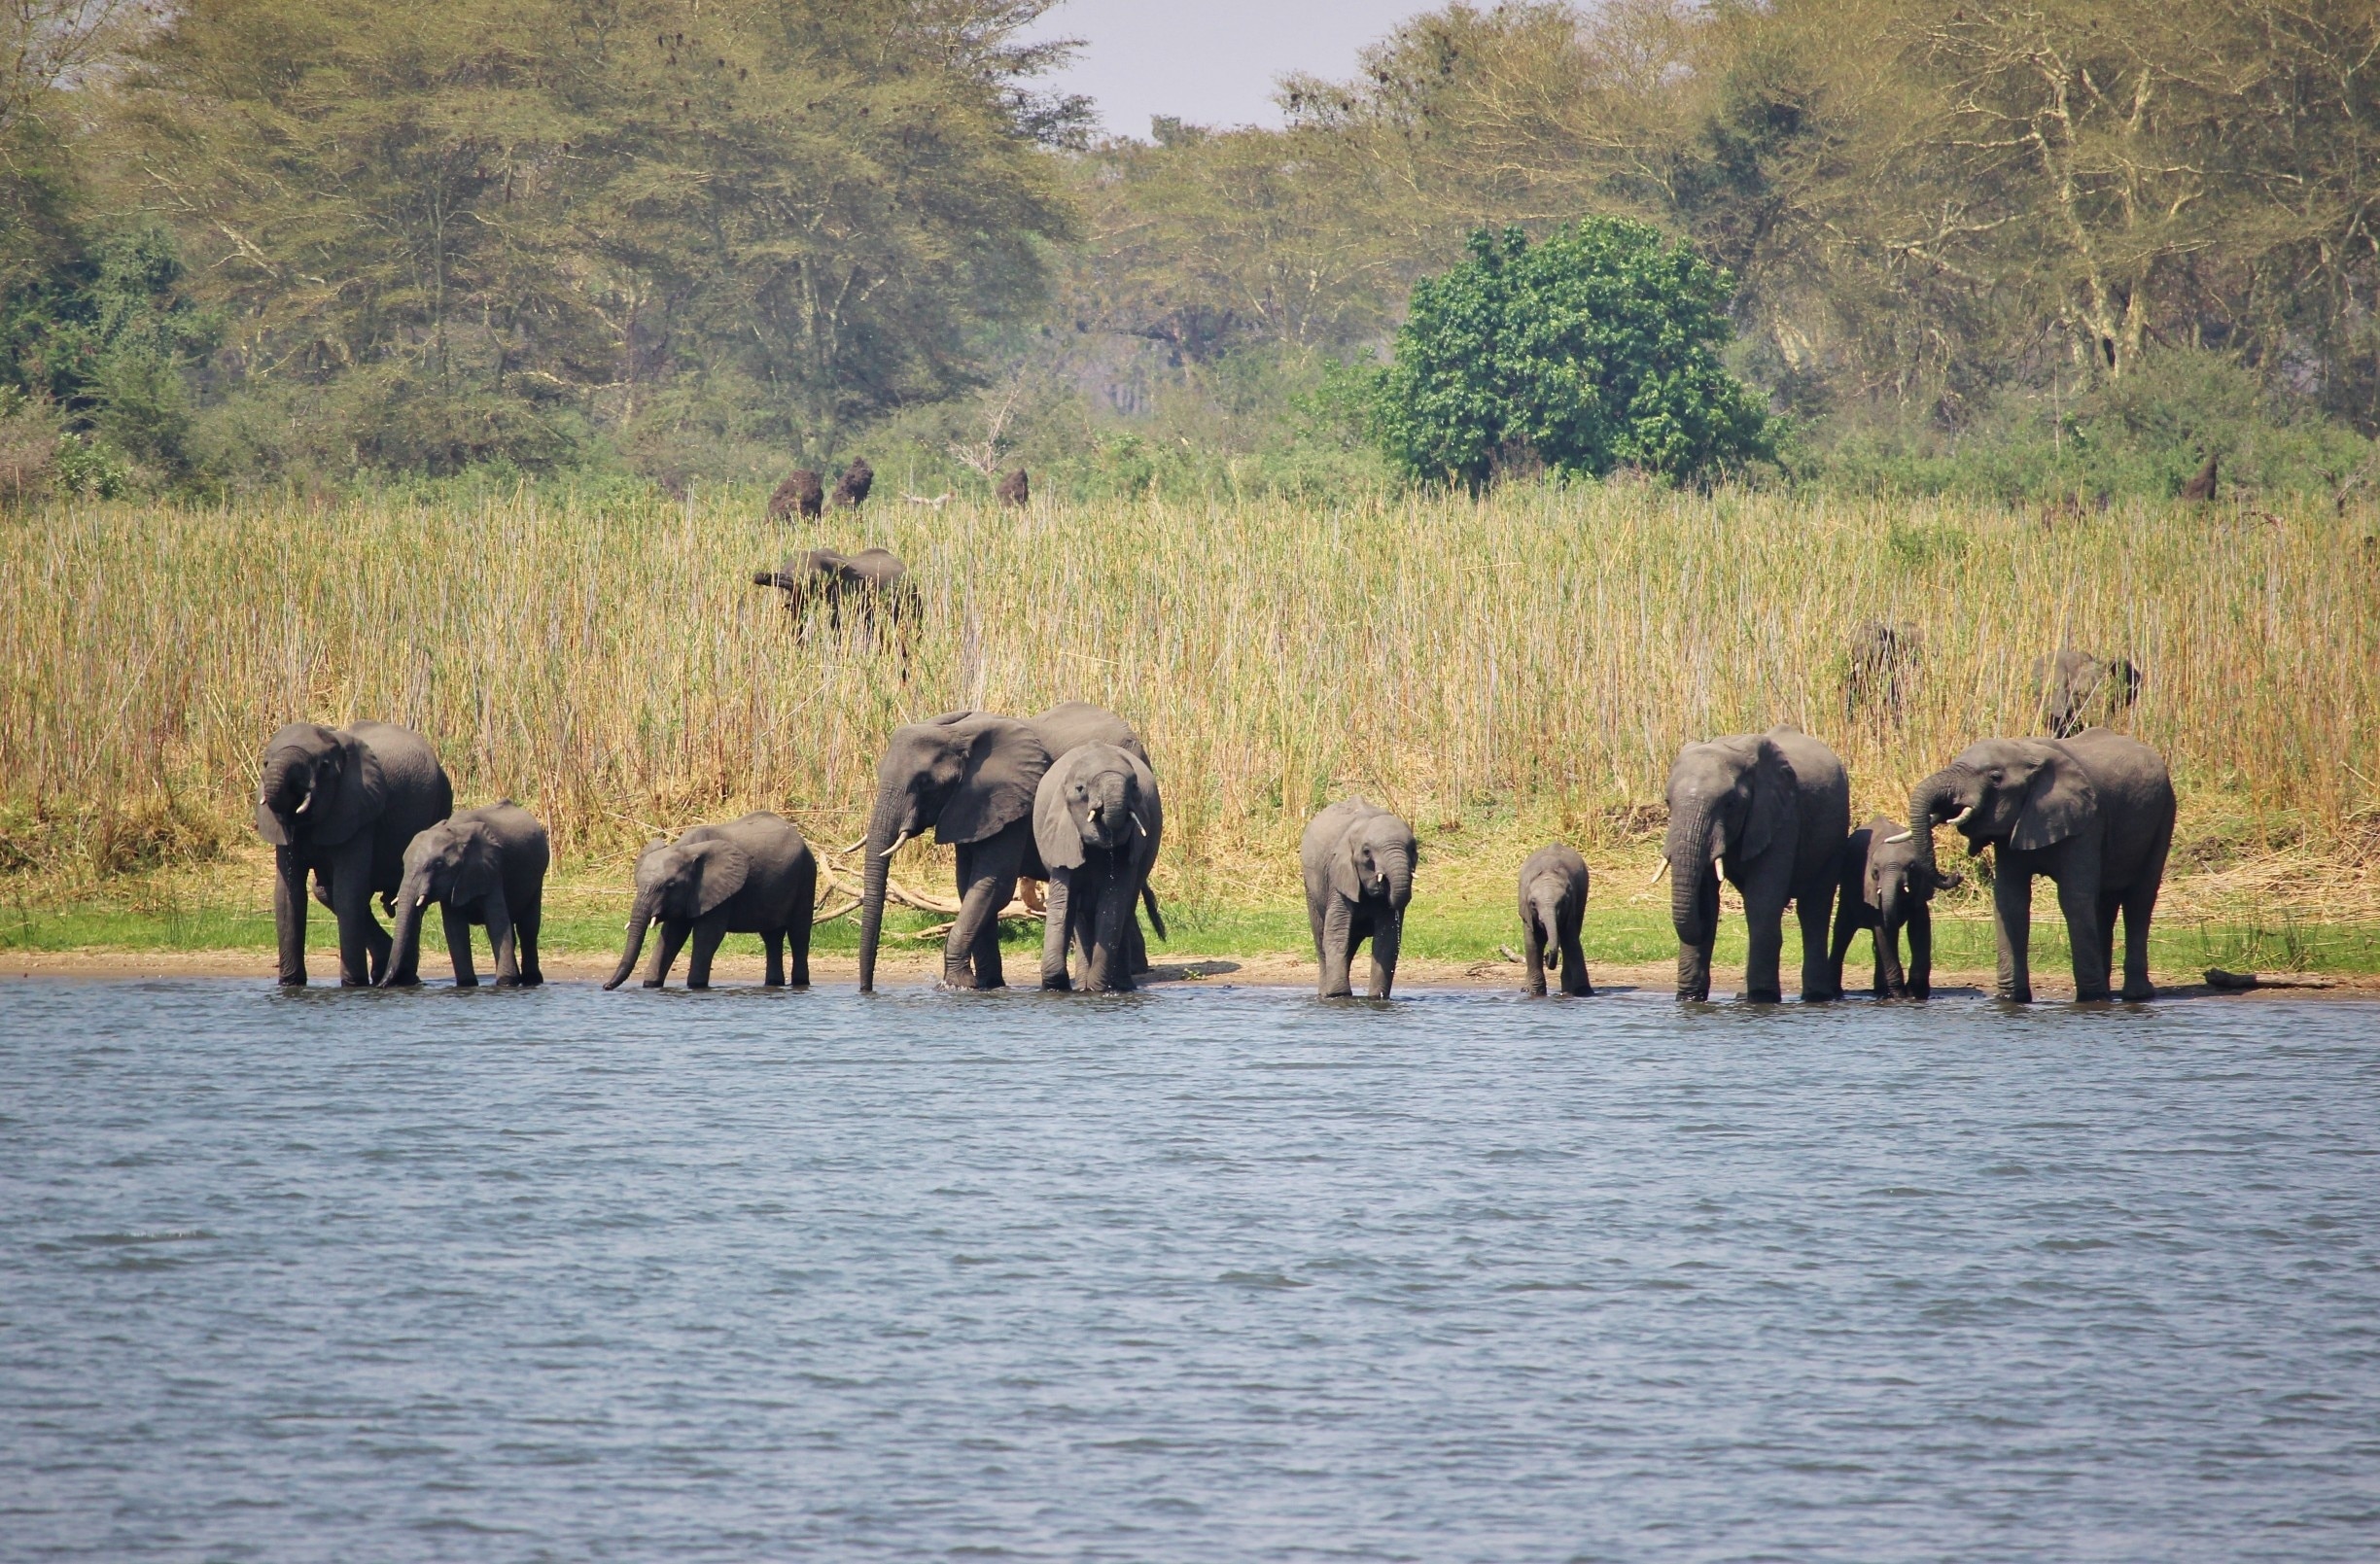 Nestled in the heart of Liwonde National Park, this gorgeous lodge offers safaris on both land and by boat along the Shire River. The lodge itself sits on the banks of the river, so herds of elephants coming down to drink is a common sight. 